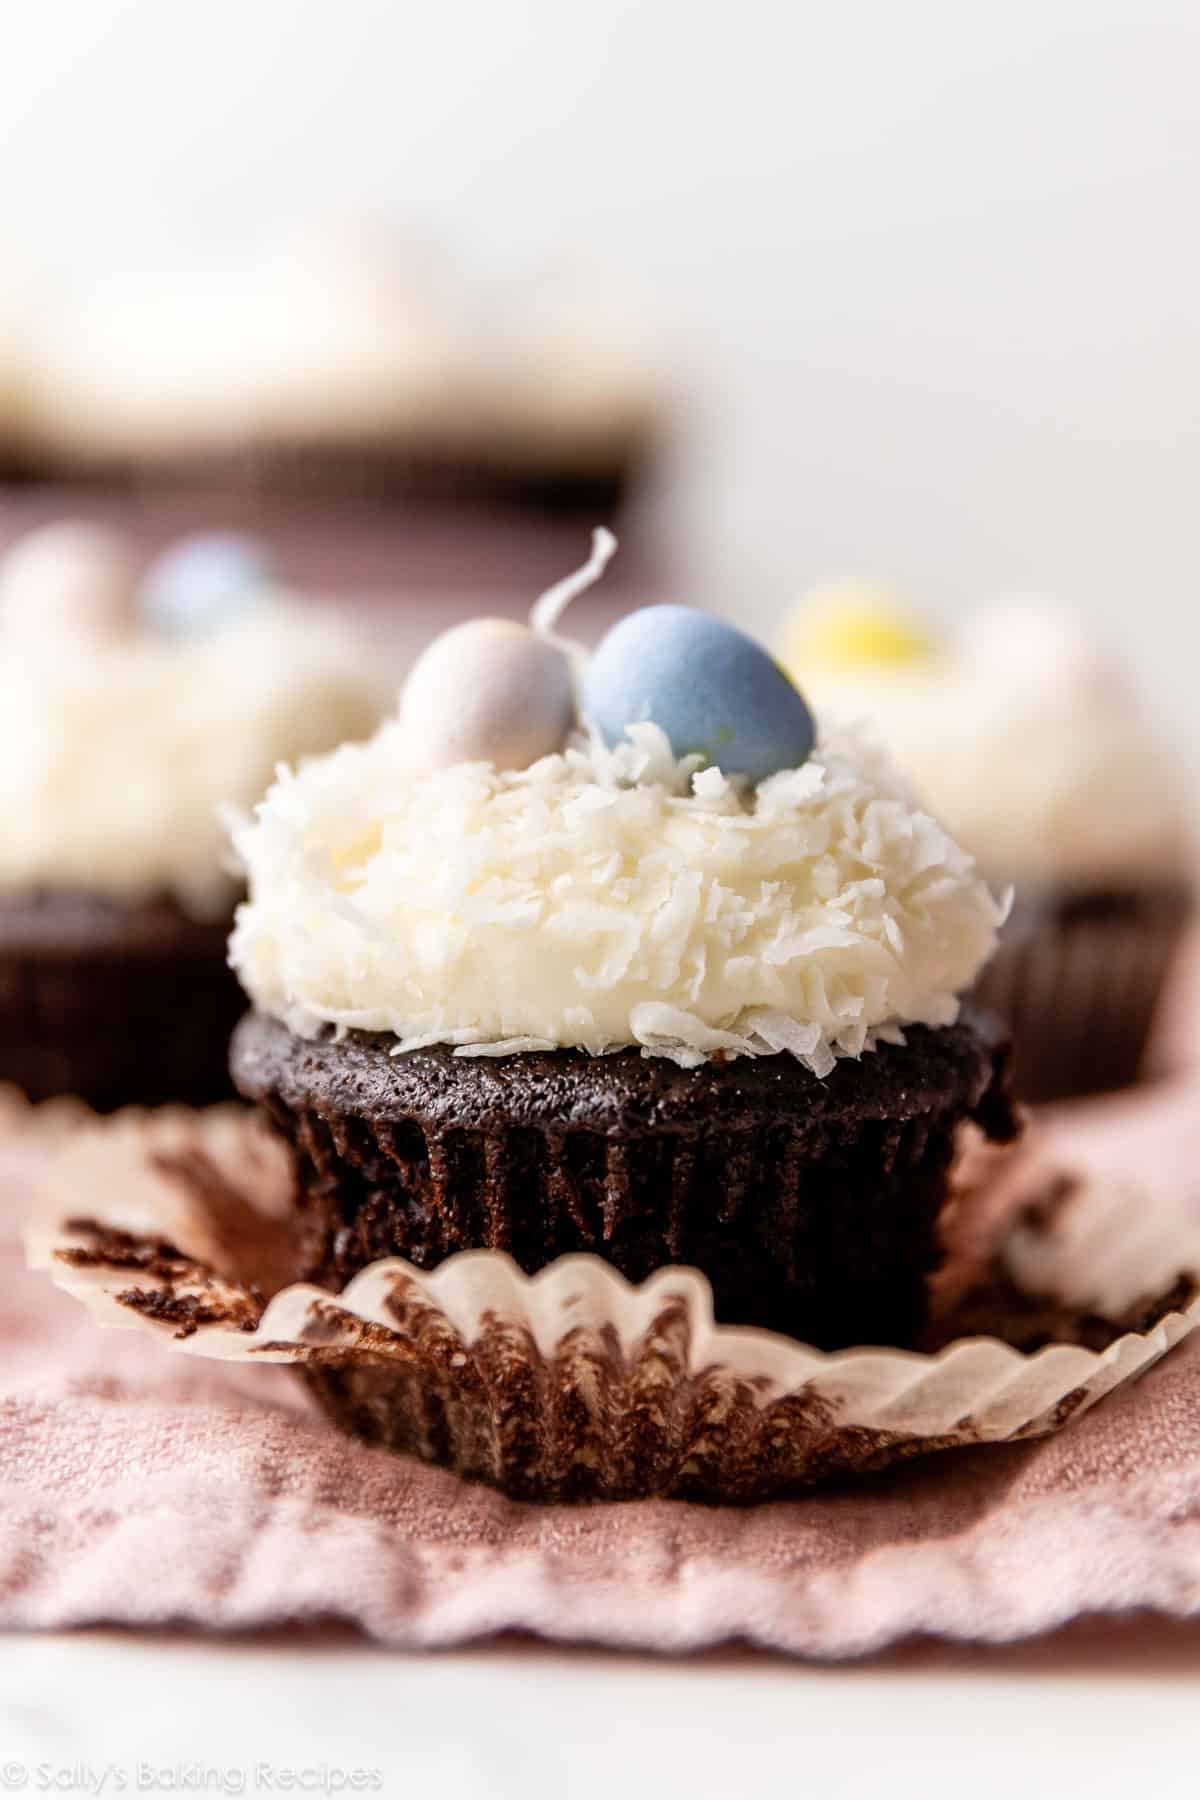 Easter chocolate cupcake with cream cheese frosting, coconut, and Easter egg candies on top.